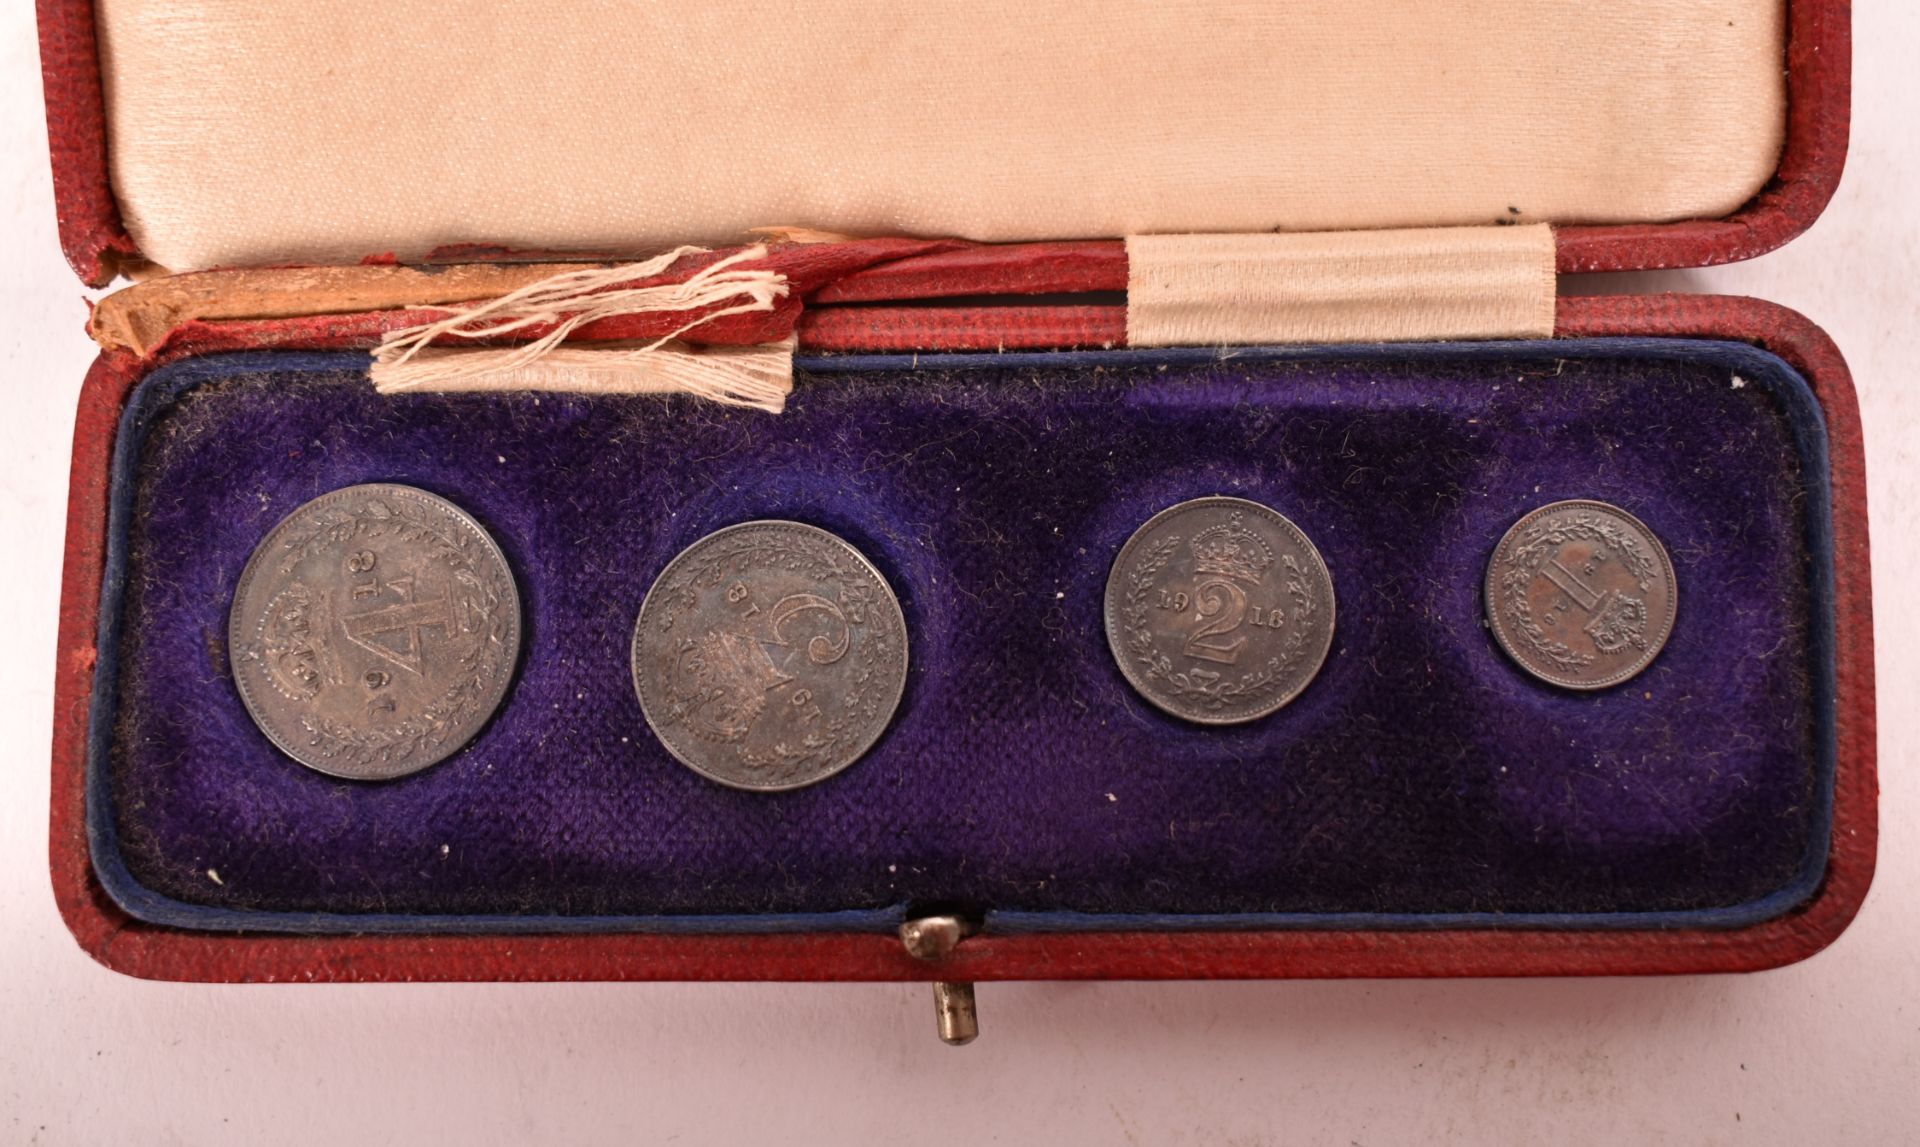 CASED 1918 MAUNDY MONEY SET OF COINS - Image 5 of 7